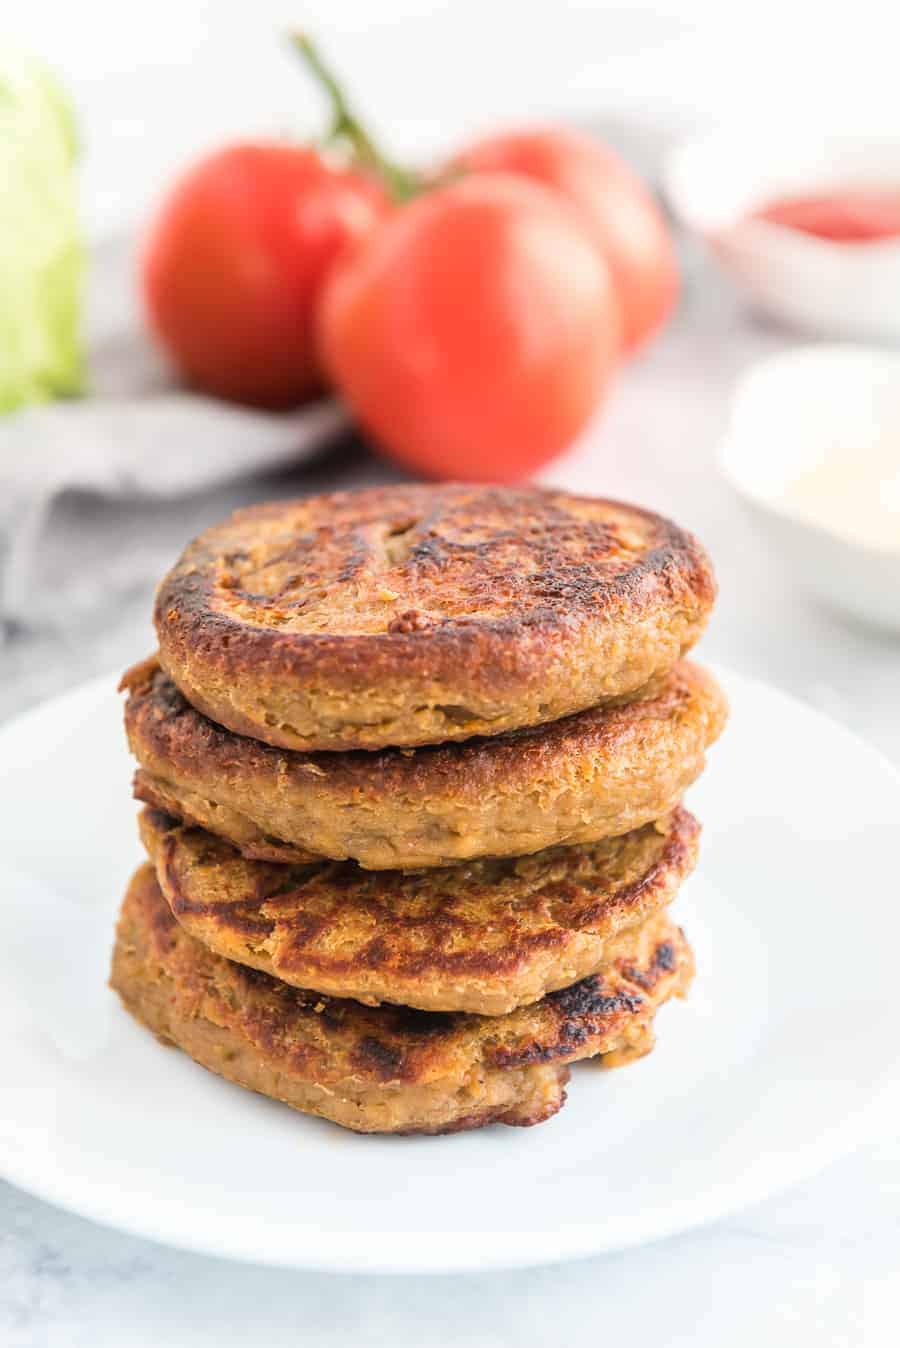 With all the traditional toppings of lettuce, tomato, cheese, and pickles — you might decide these Veggie and Lentil Burgers are just as tasty and flavorful as a regular meaty hamburger!